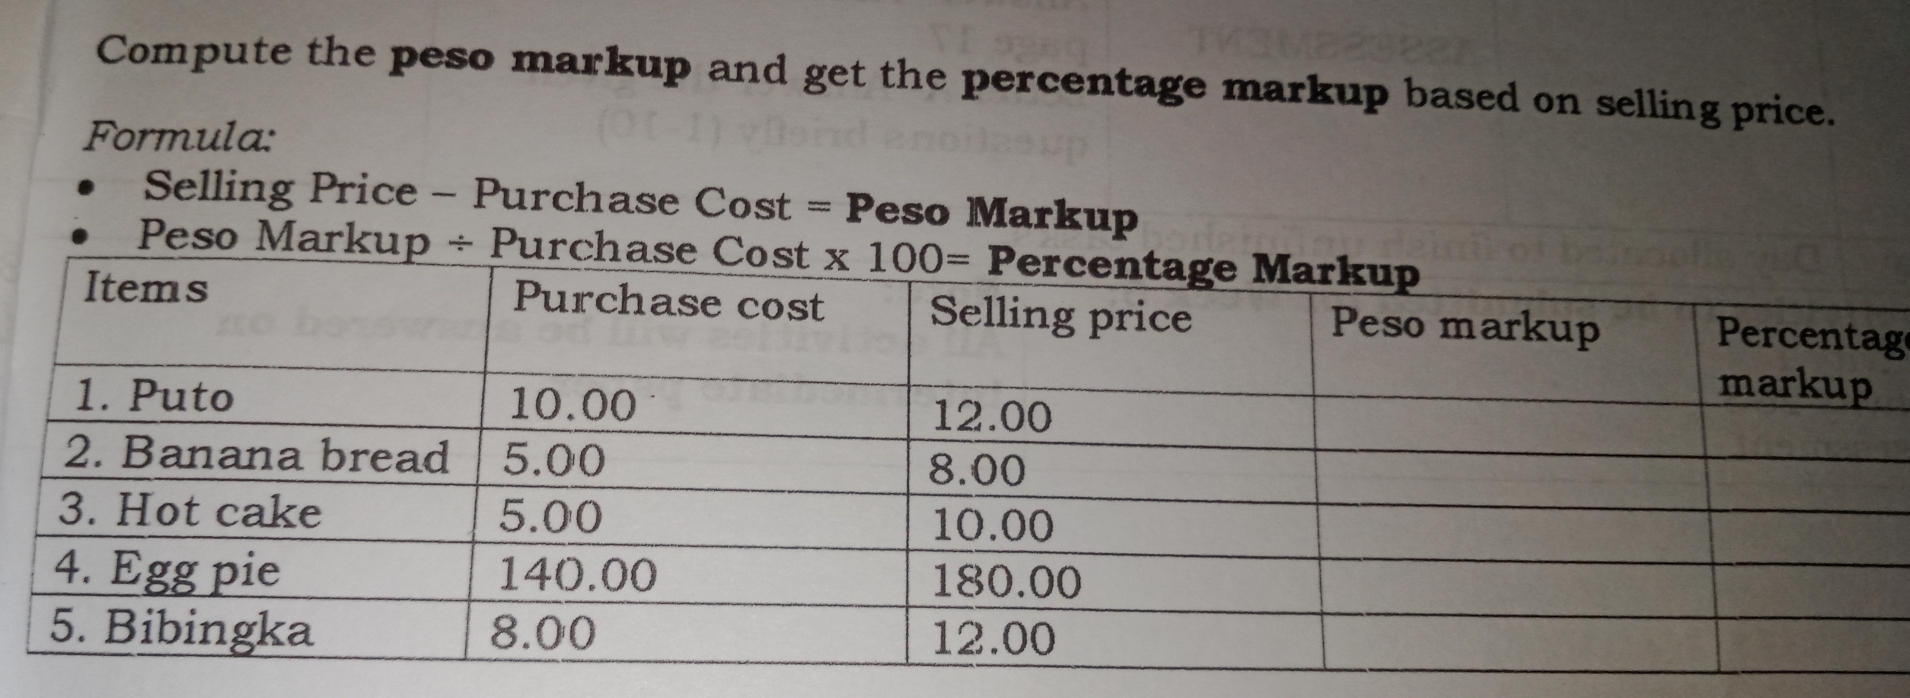 Compute the peso markup and get the percentage markup based on selling price. Formula: Selling Price - Purchase Cost = Peso Markup Peso Ma g ngka 8.00 12.00